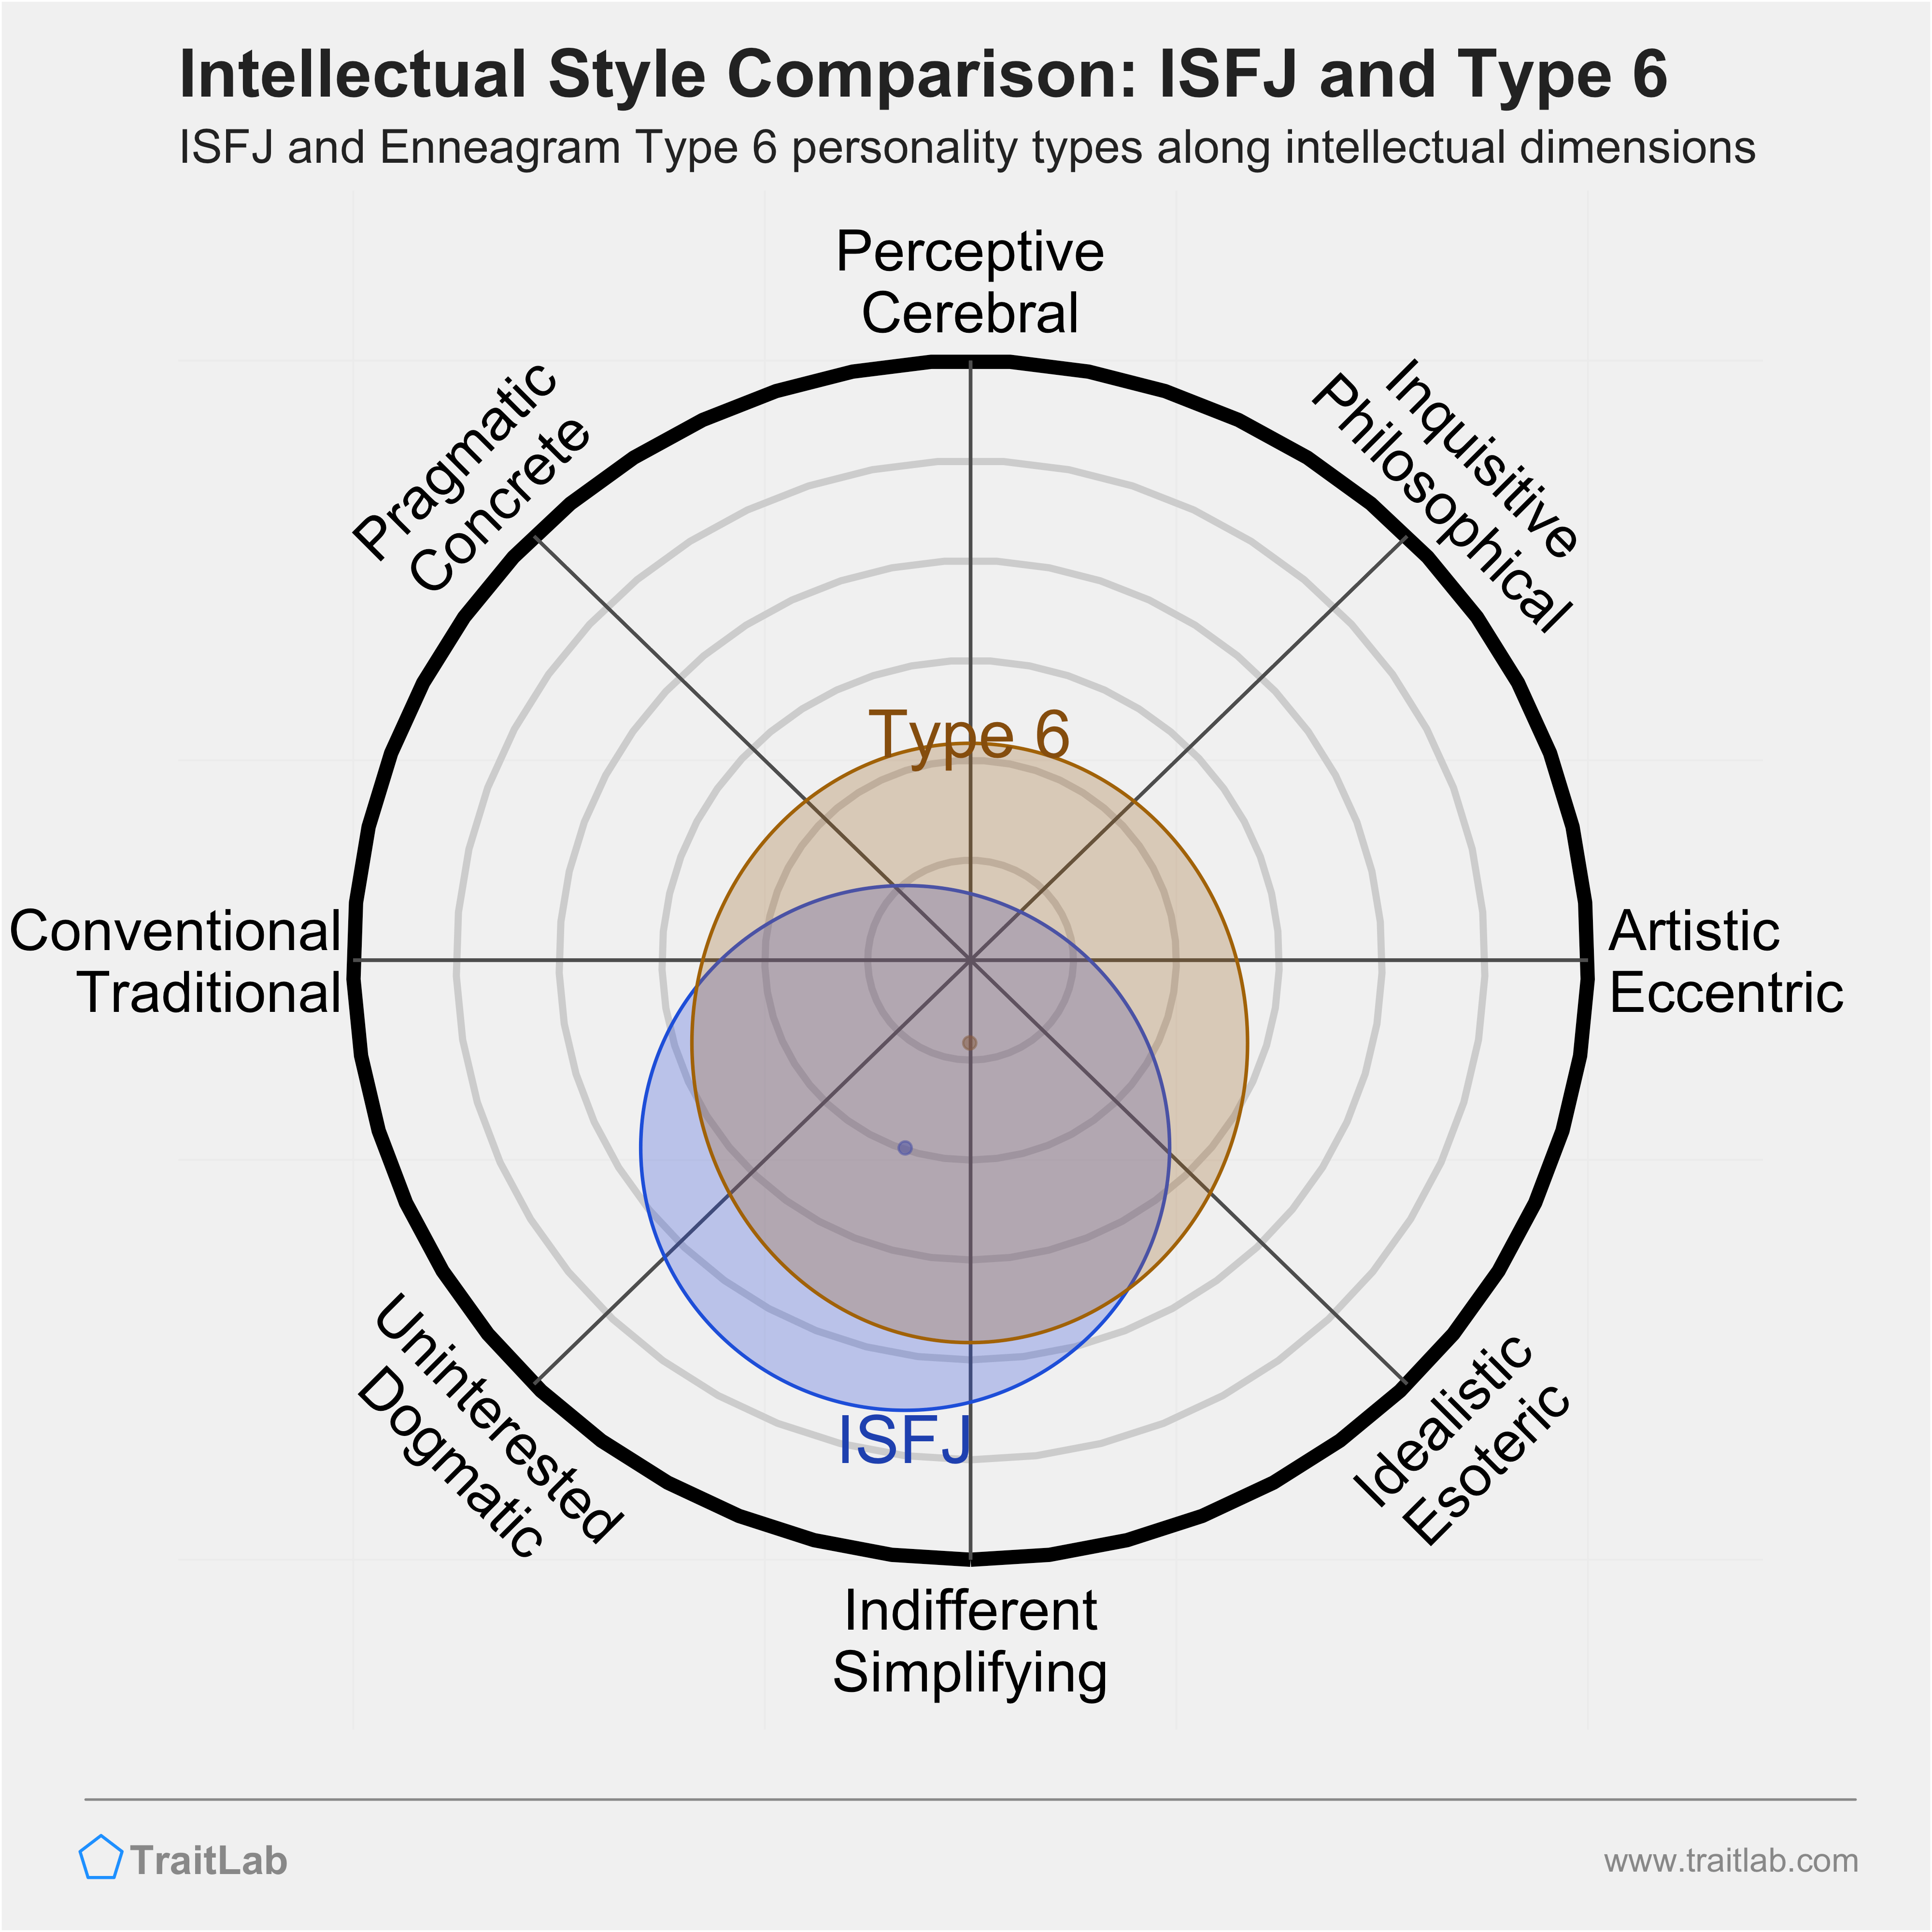 ISFJ and Type 6 comparison across intellectual dimensions